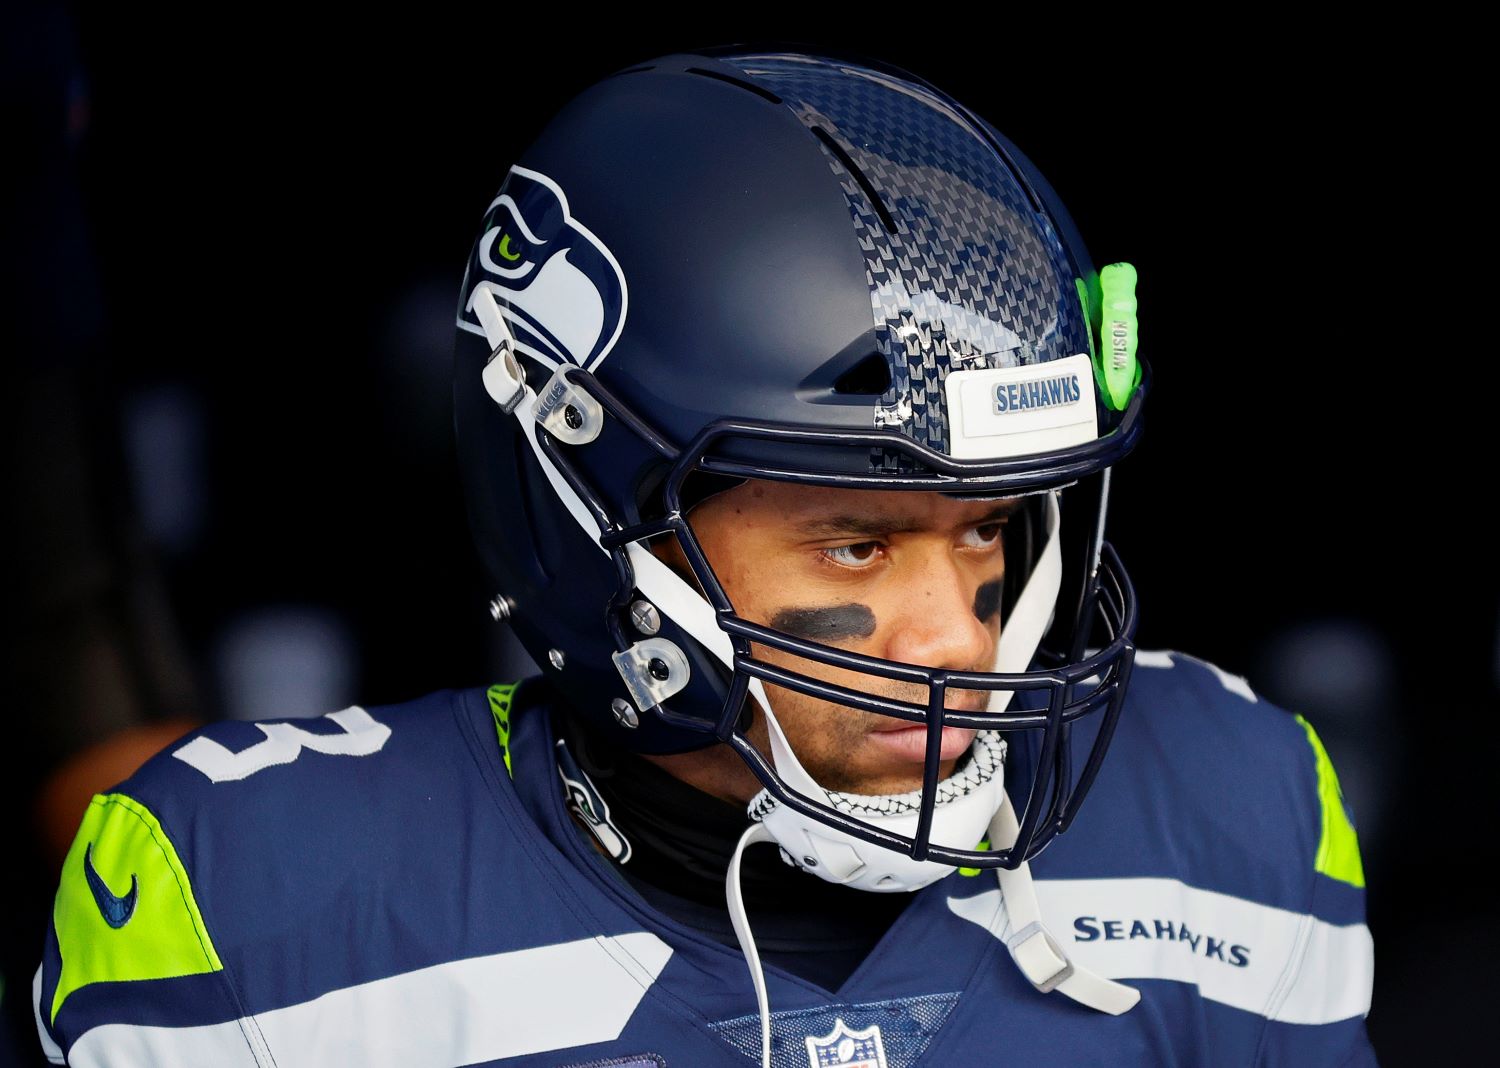 Russell Wilson should be worried about his future with the Seahawks given the team's recent committment to a GM who has lost his magic touch.